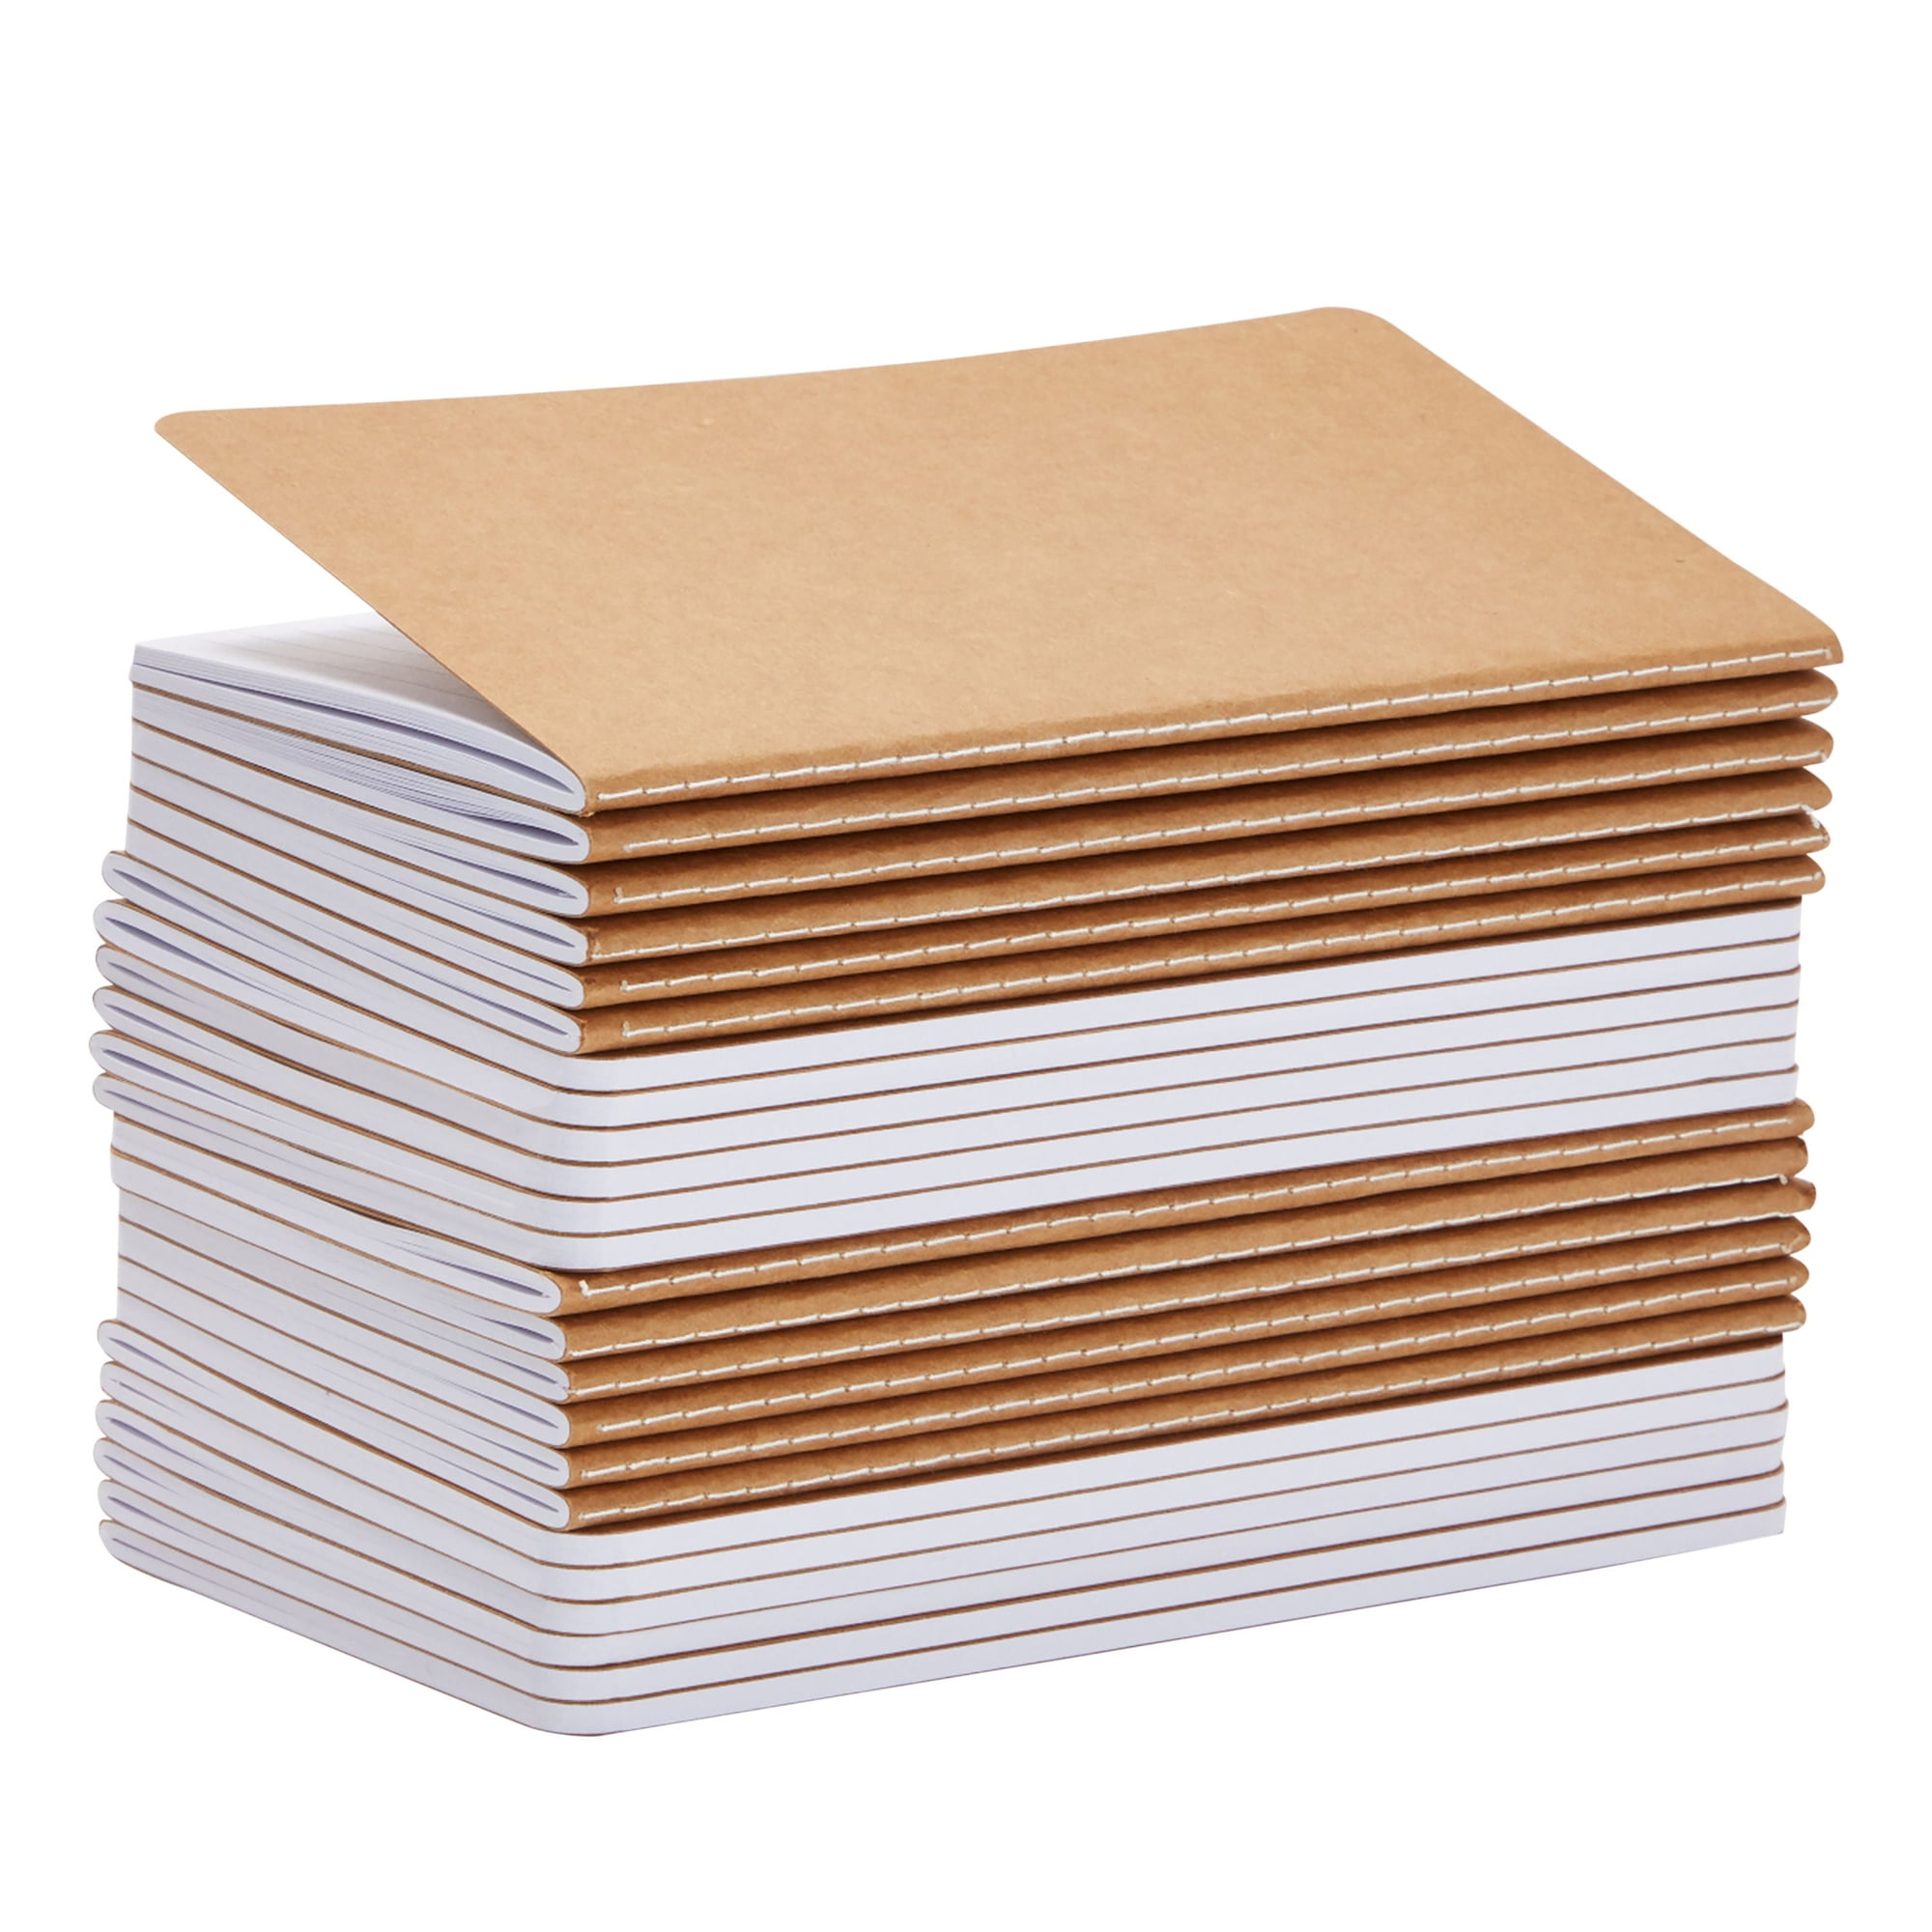 Paper Junkie 24 Pack Lined Kraft Paper Notebook Bulk Set, Travel Journals  With 80 Pages For Students, Travelers, Kids, Office Supplies, 4x8 In :  Target